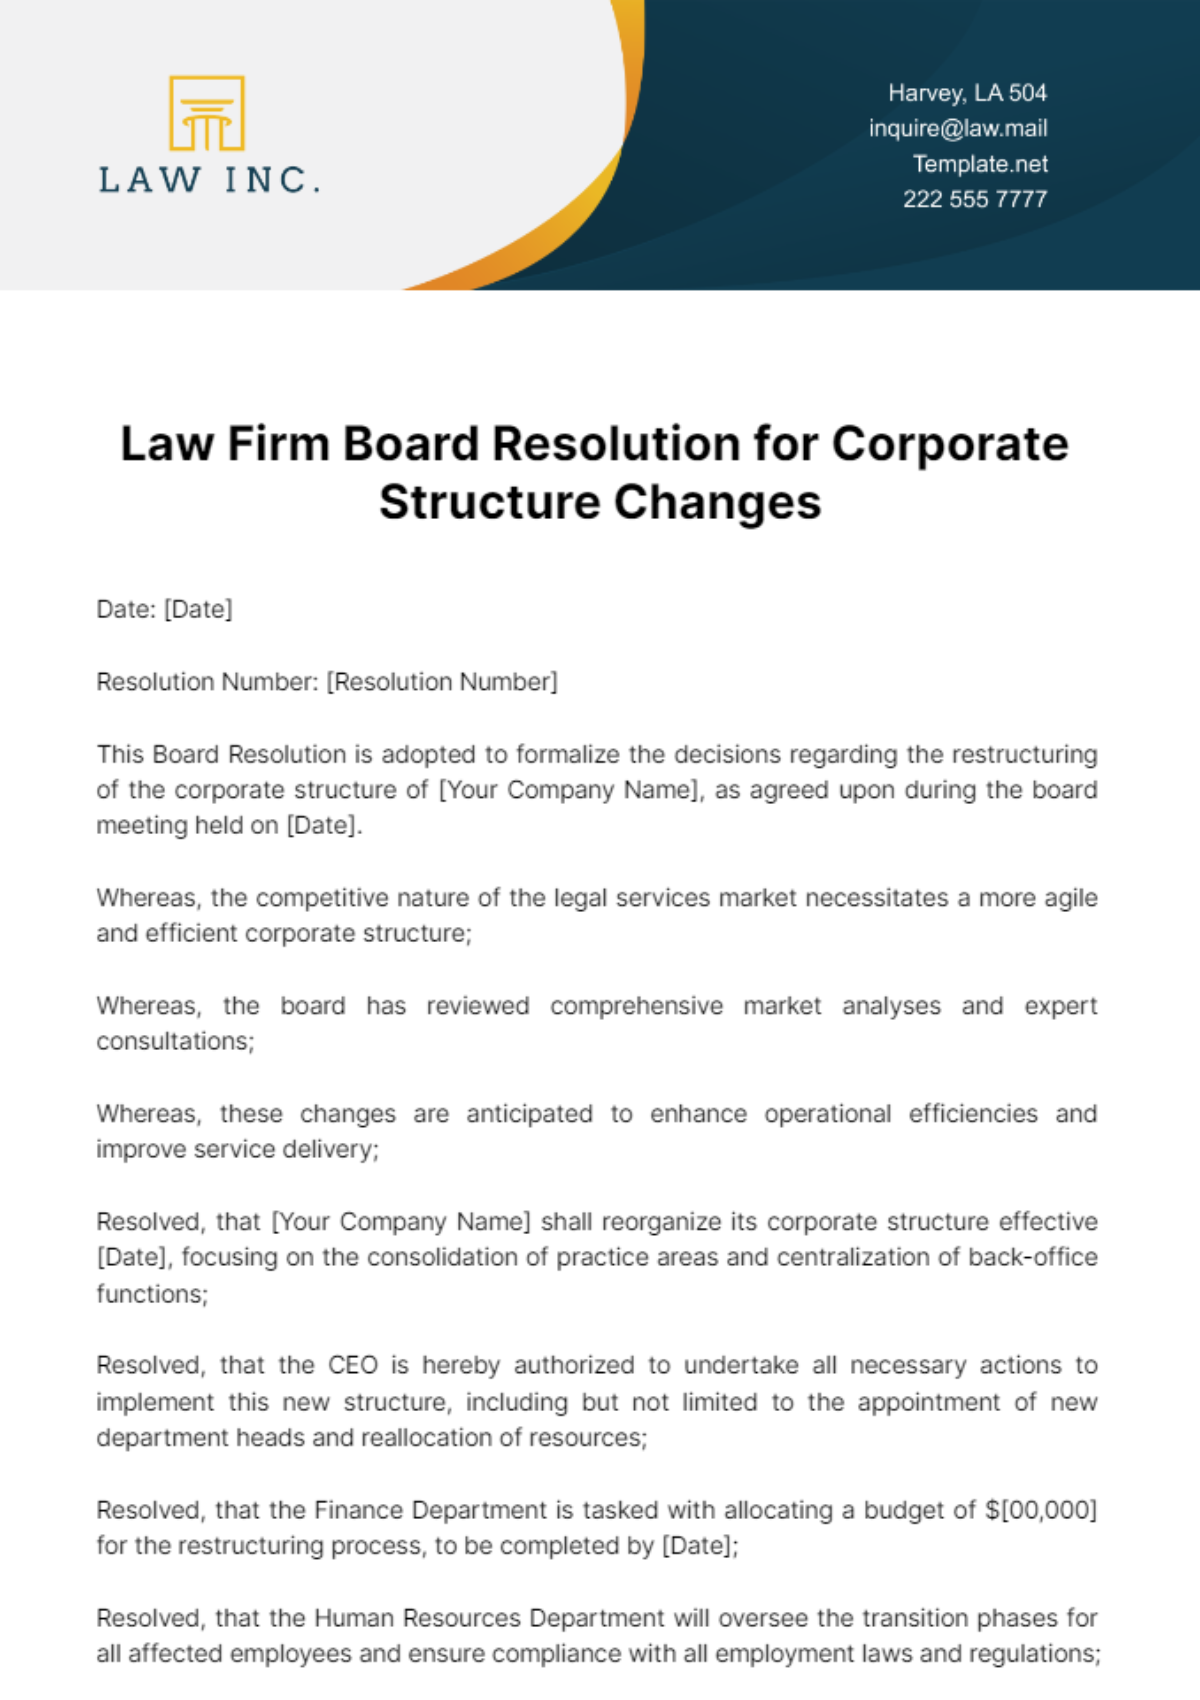 Law Firm Board Resolution for Corporate Structure Changes